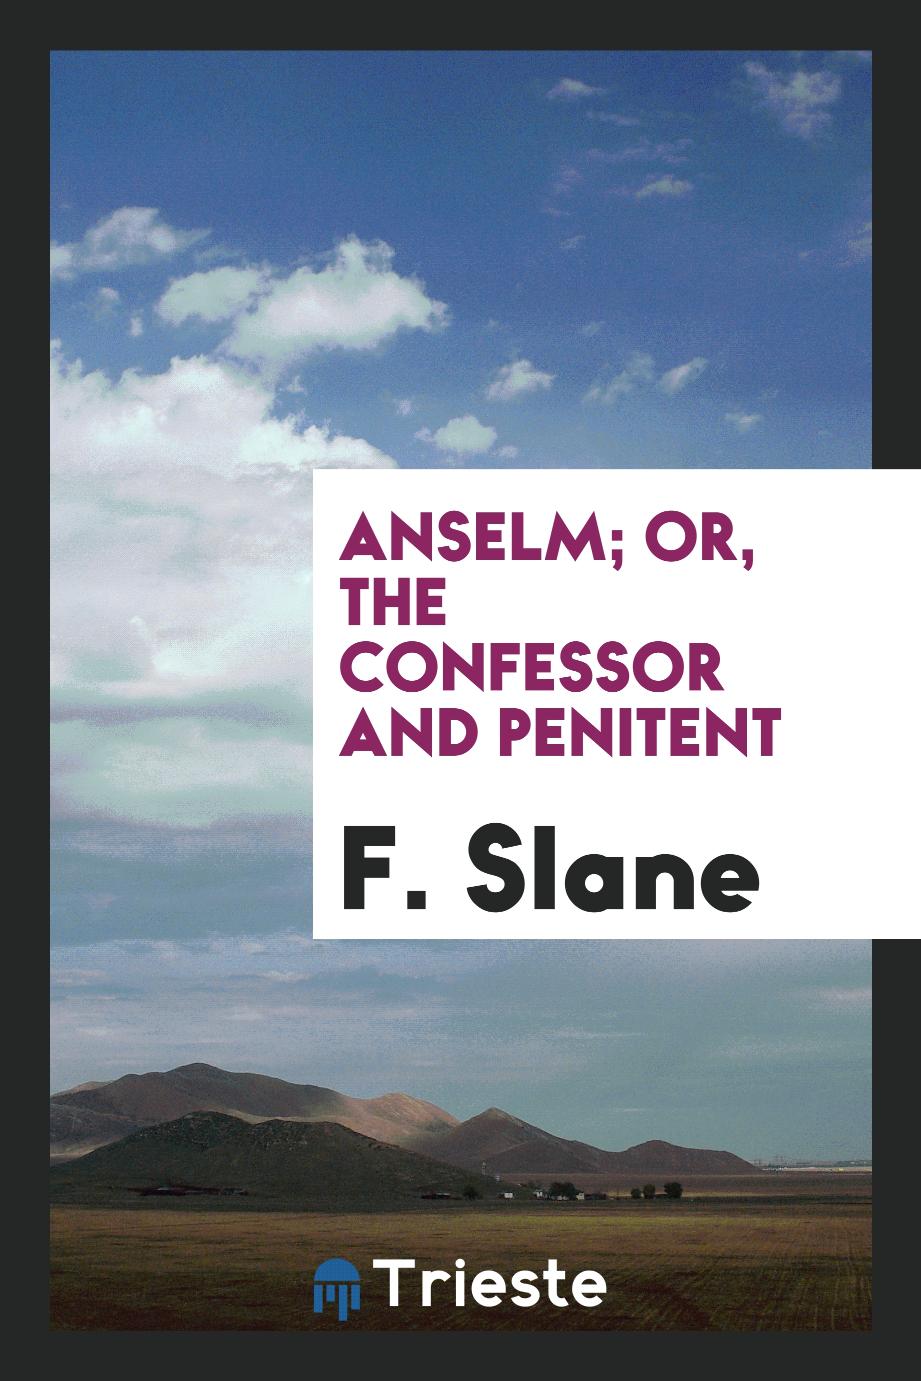 Anselm; or, the confessor and penitent